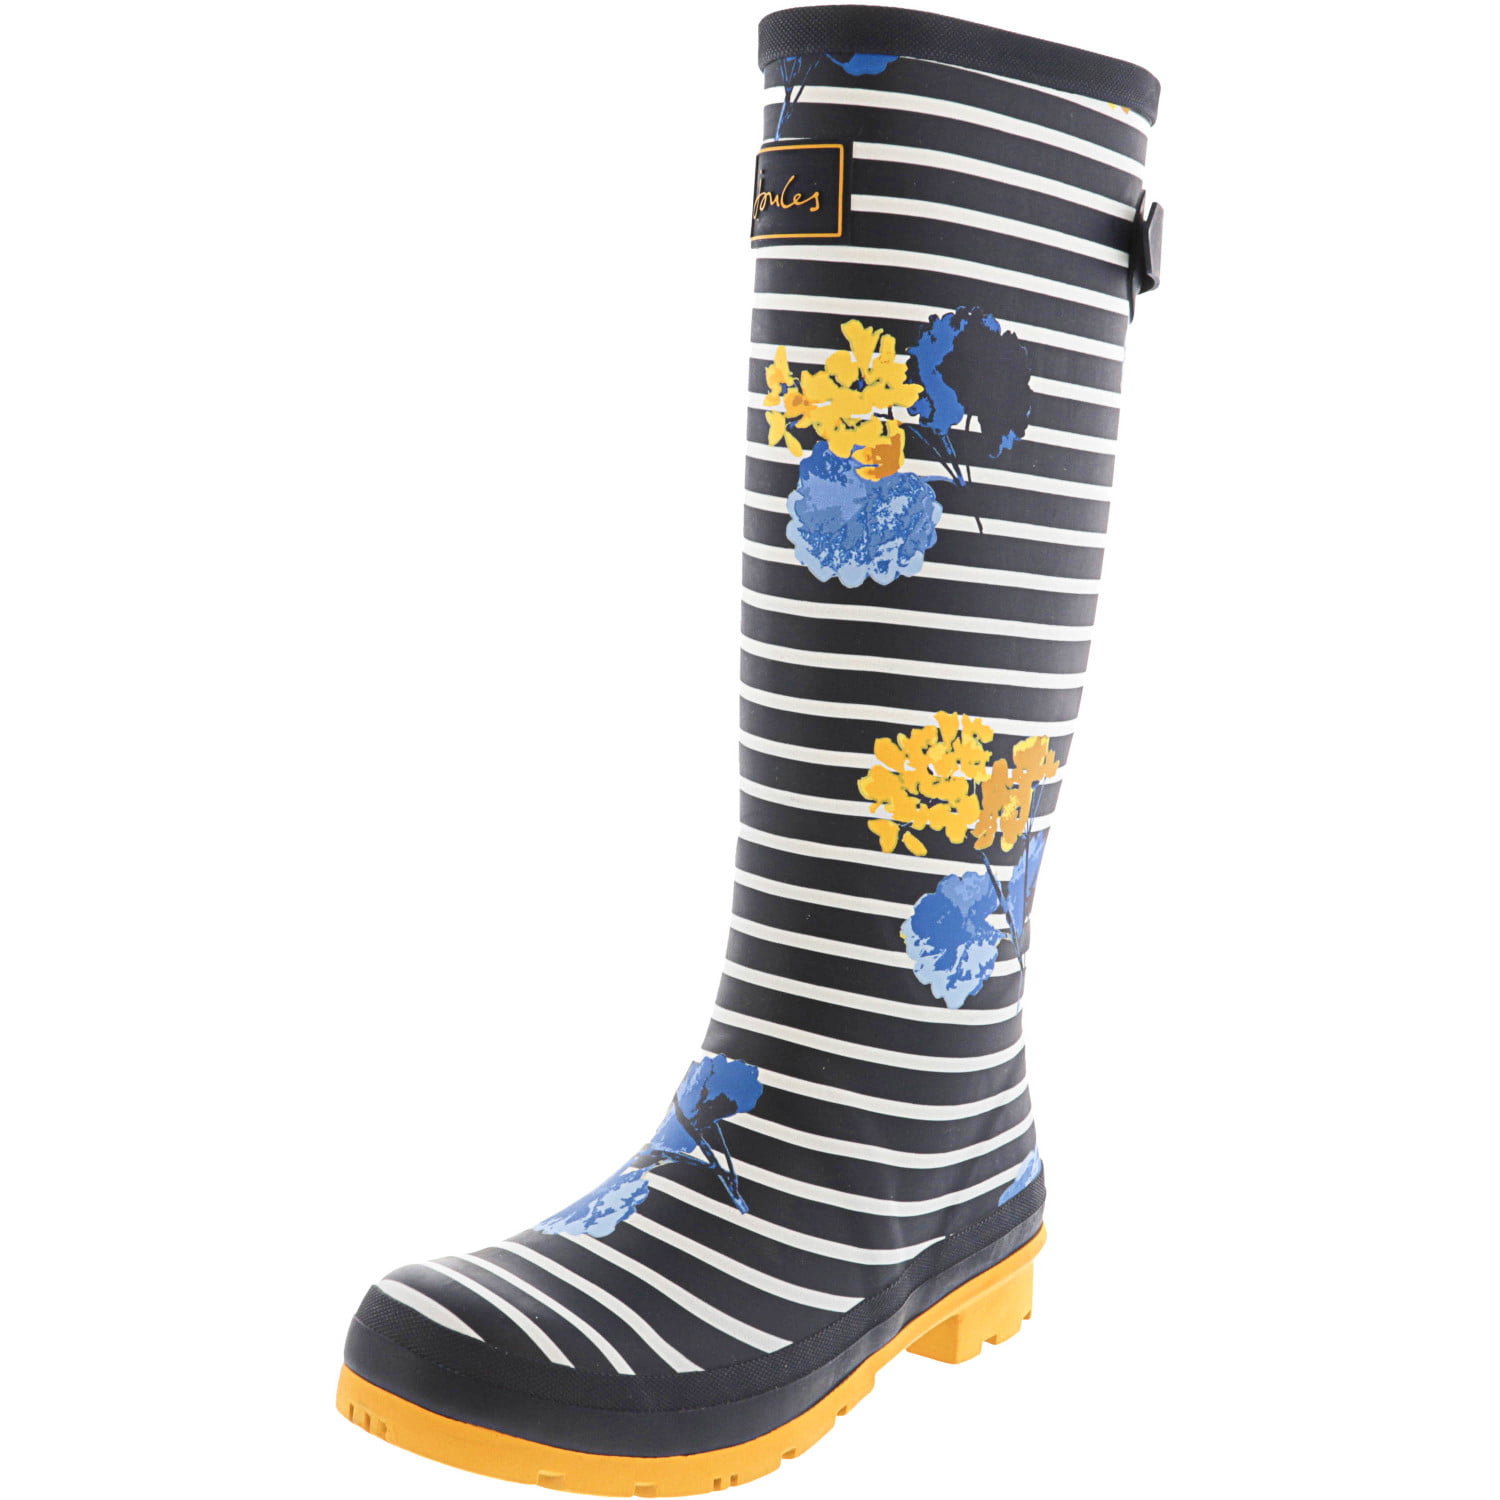 Joules Women's Molly Welly Knee-High Rubber Rain Boot 